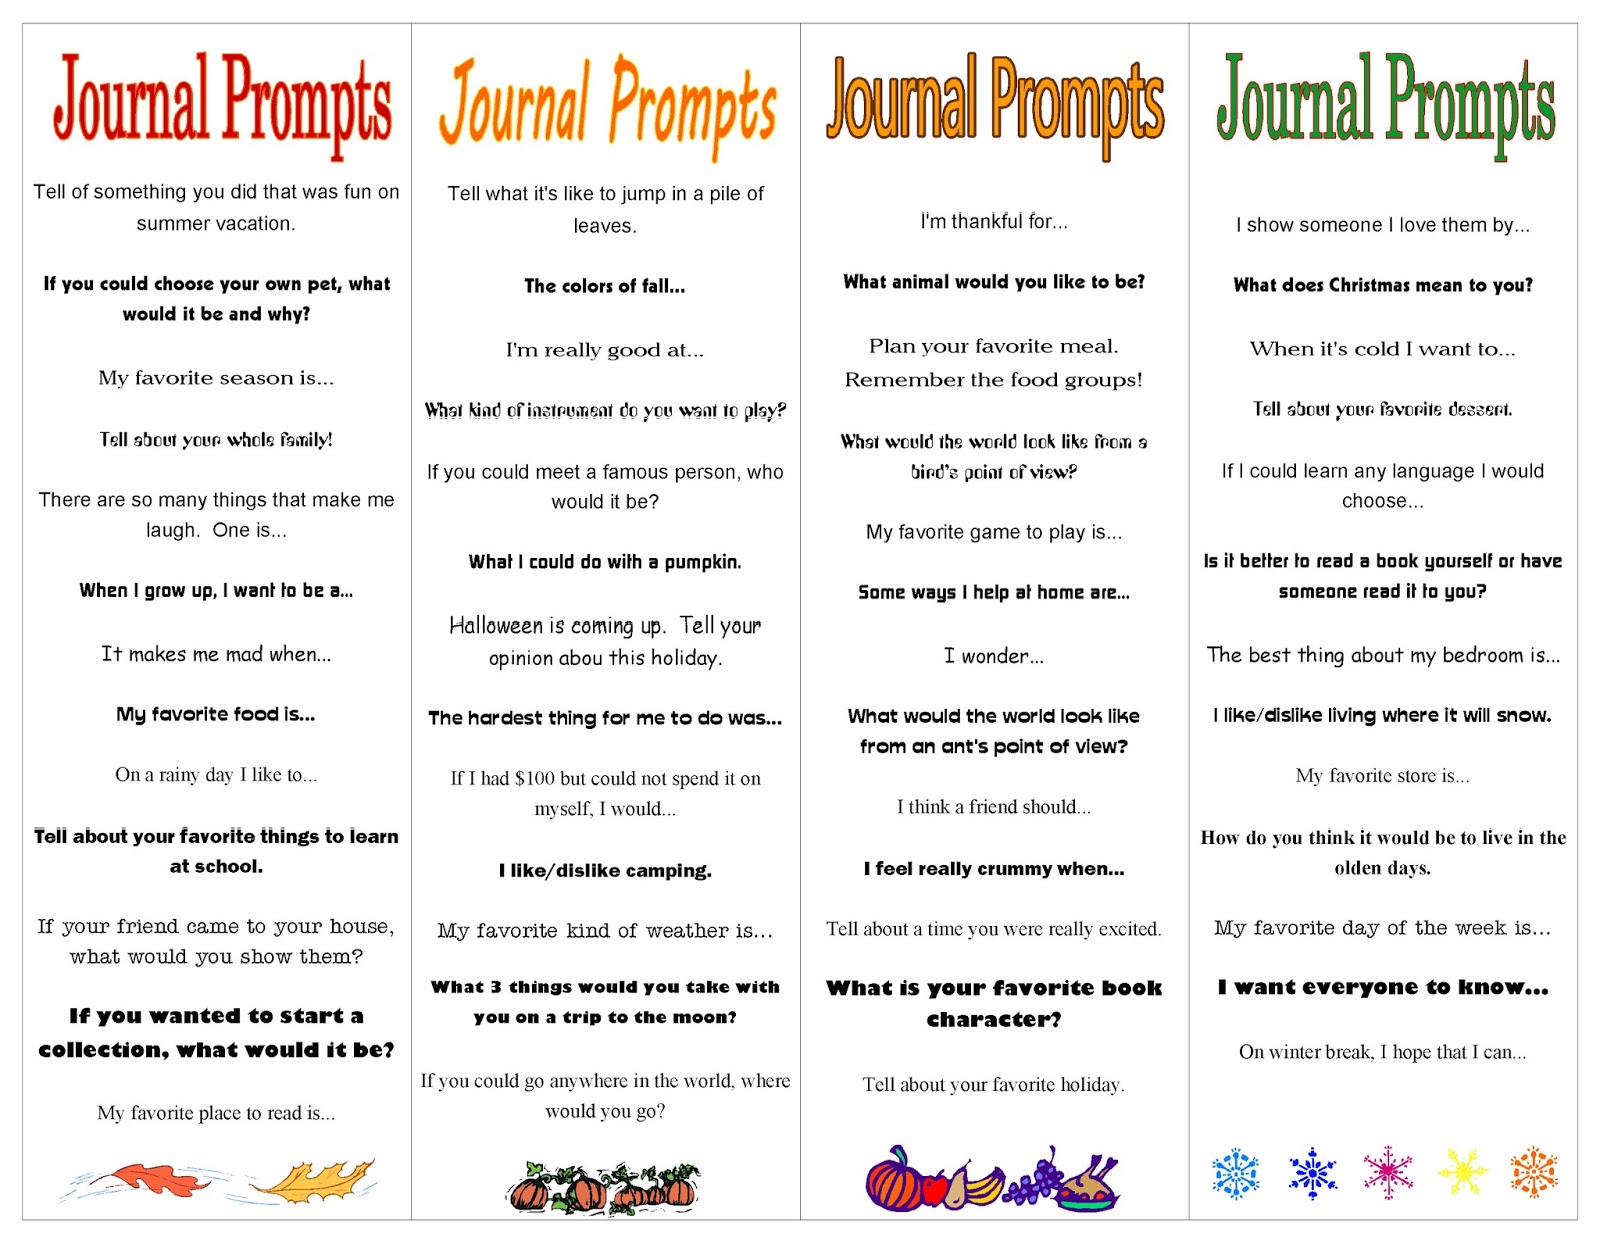 10 Best Creative Writing Prompts